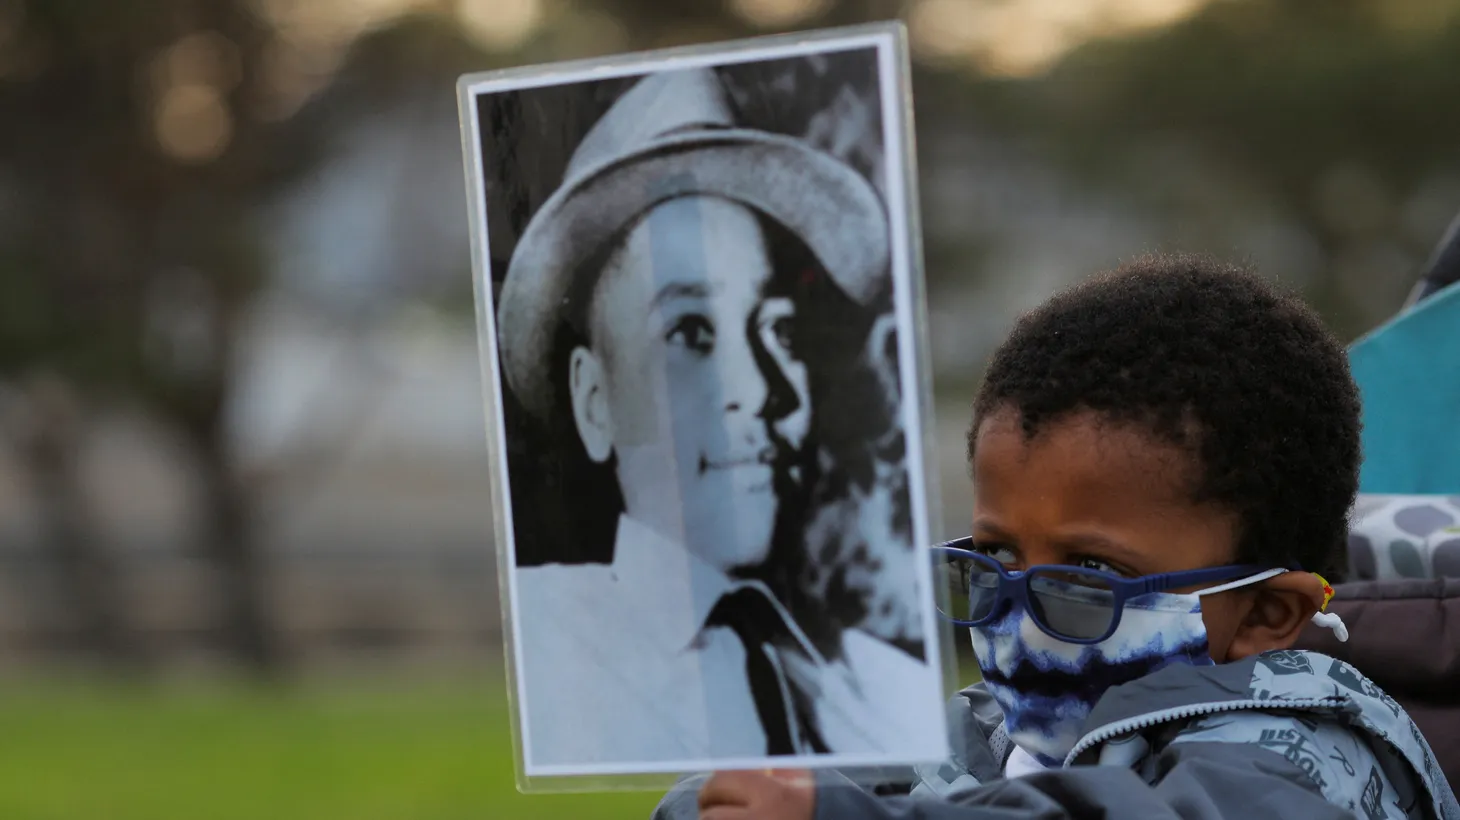 A four-year-old holds a photograph of Emmett Till, a 14-year-old Black boy who was lynched in 1955, at a vigil on the one-year anniversary of George Floyd’s murder on May 25, 2021.